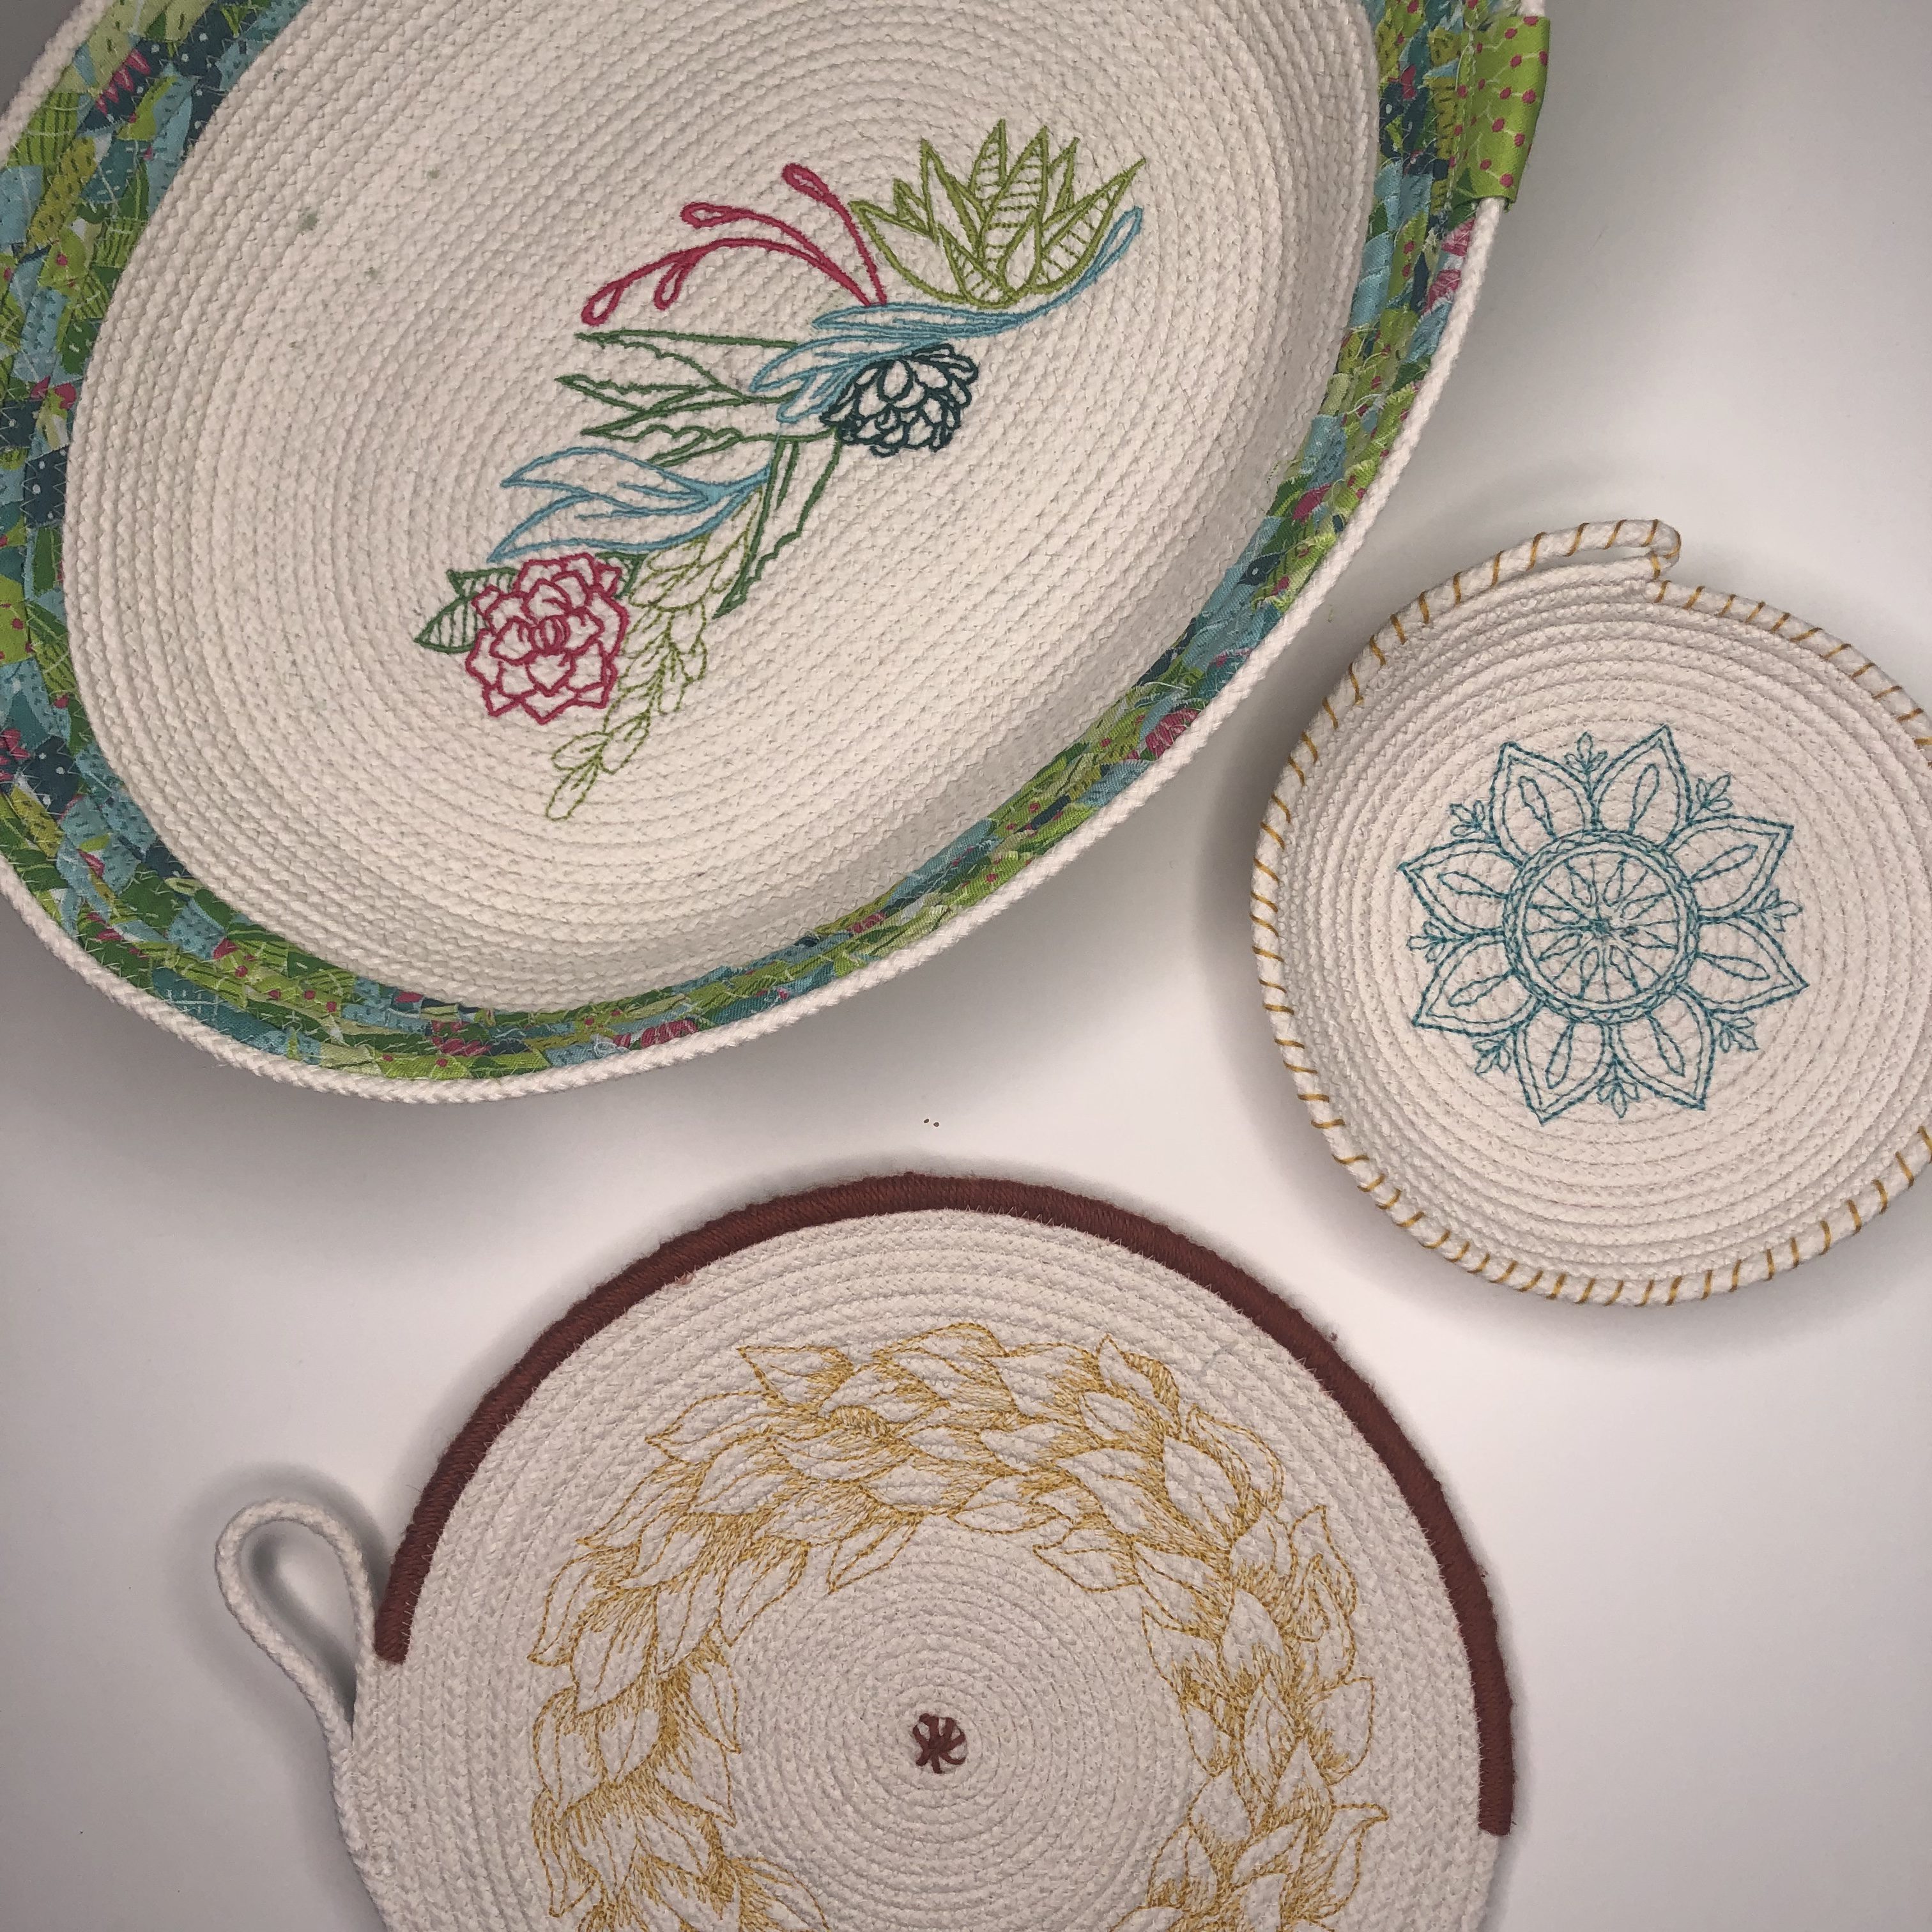 Machine Embroider a Rope Bowl - WeAllSew